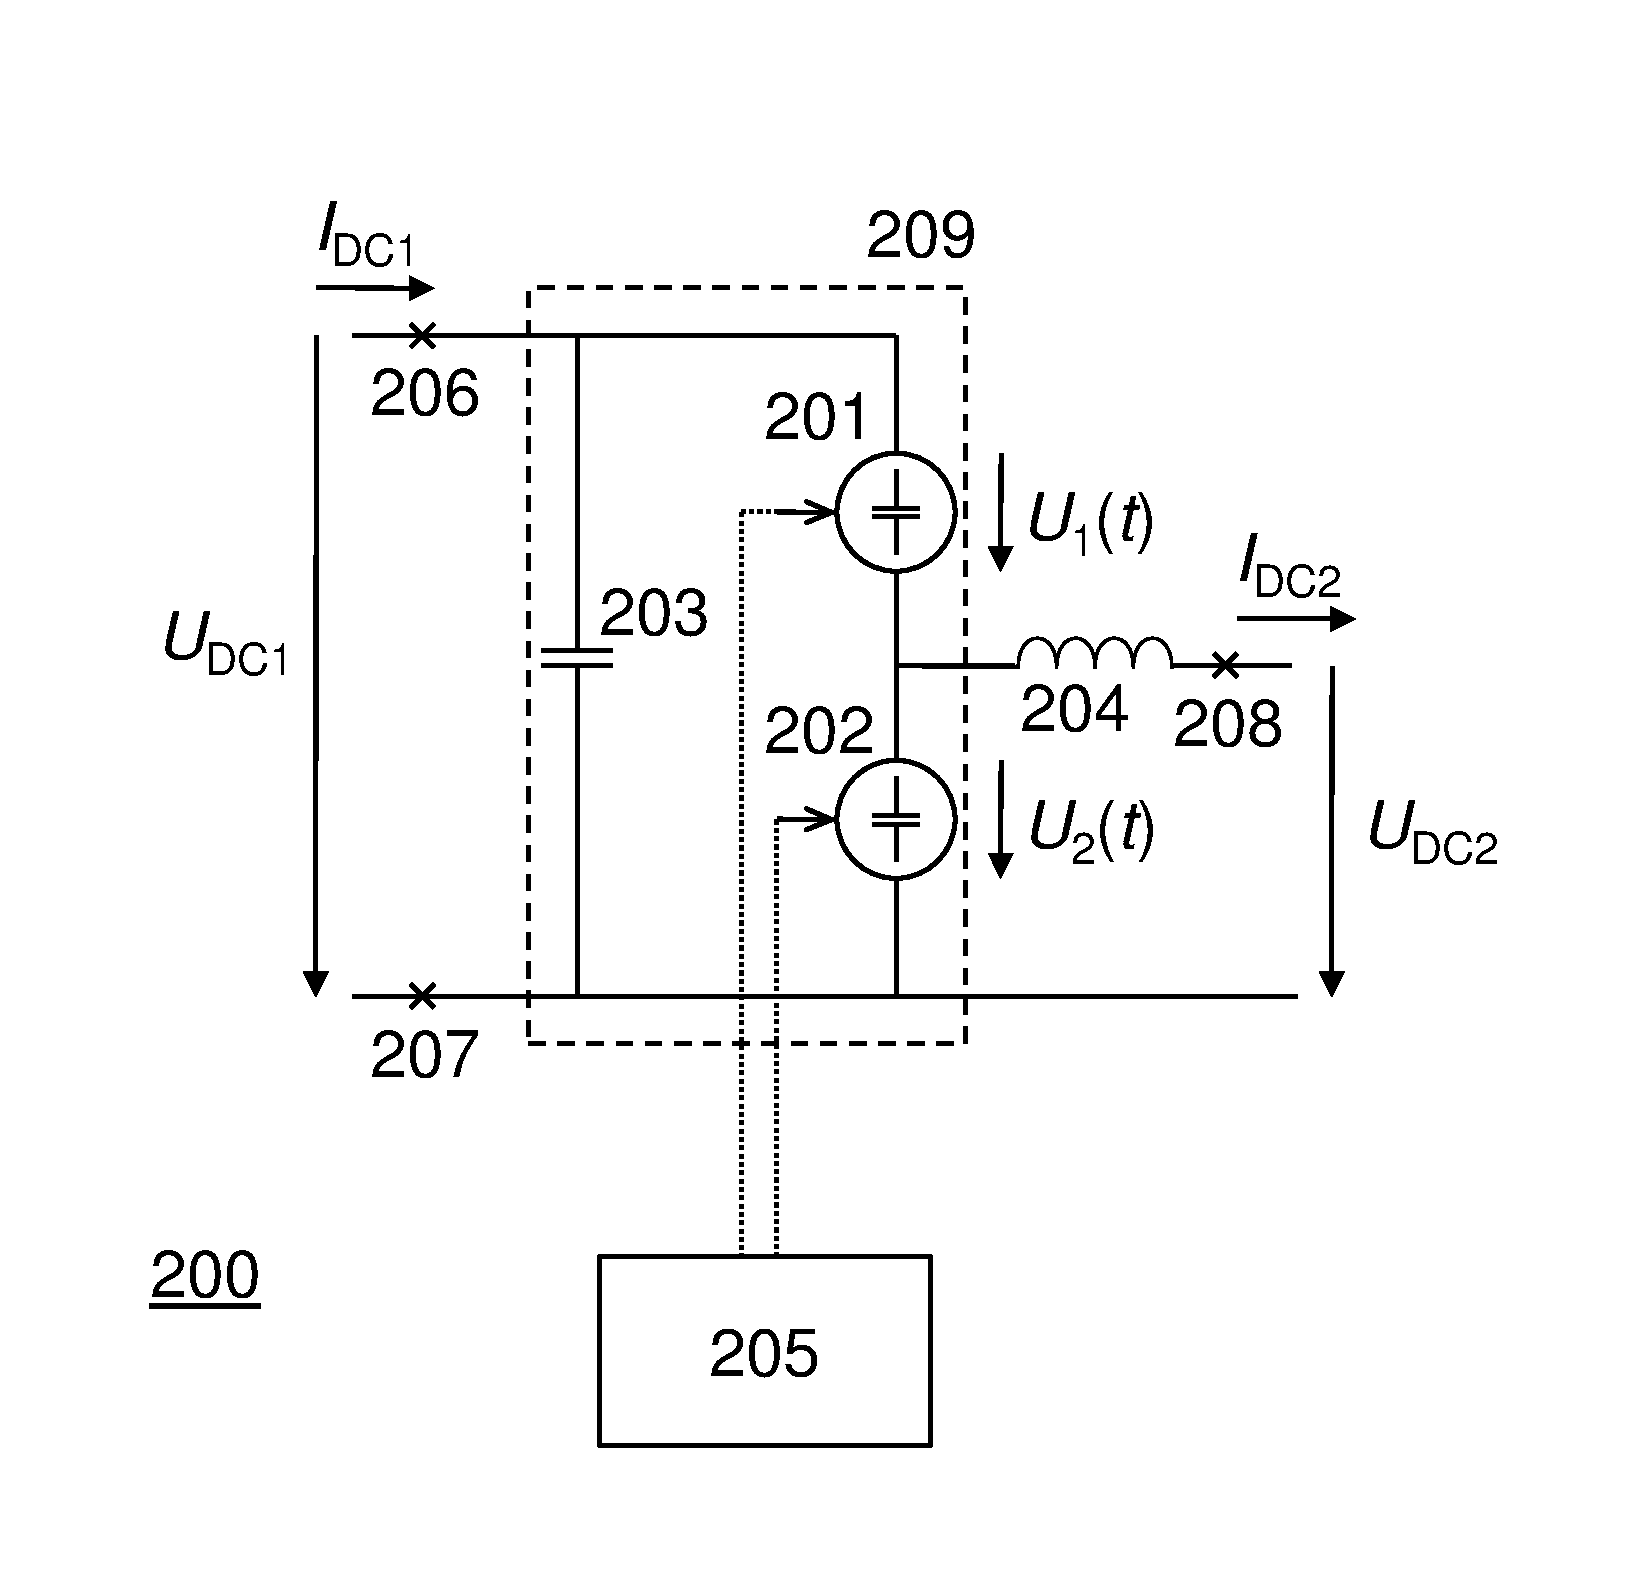 Bidirectional unisolated dc-dc converter based on cascaded cells